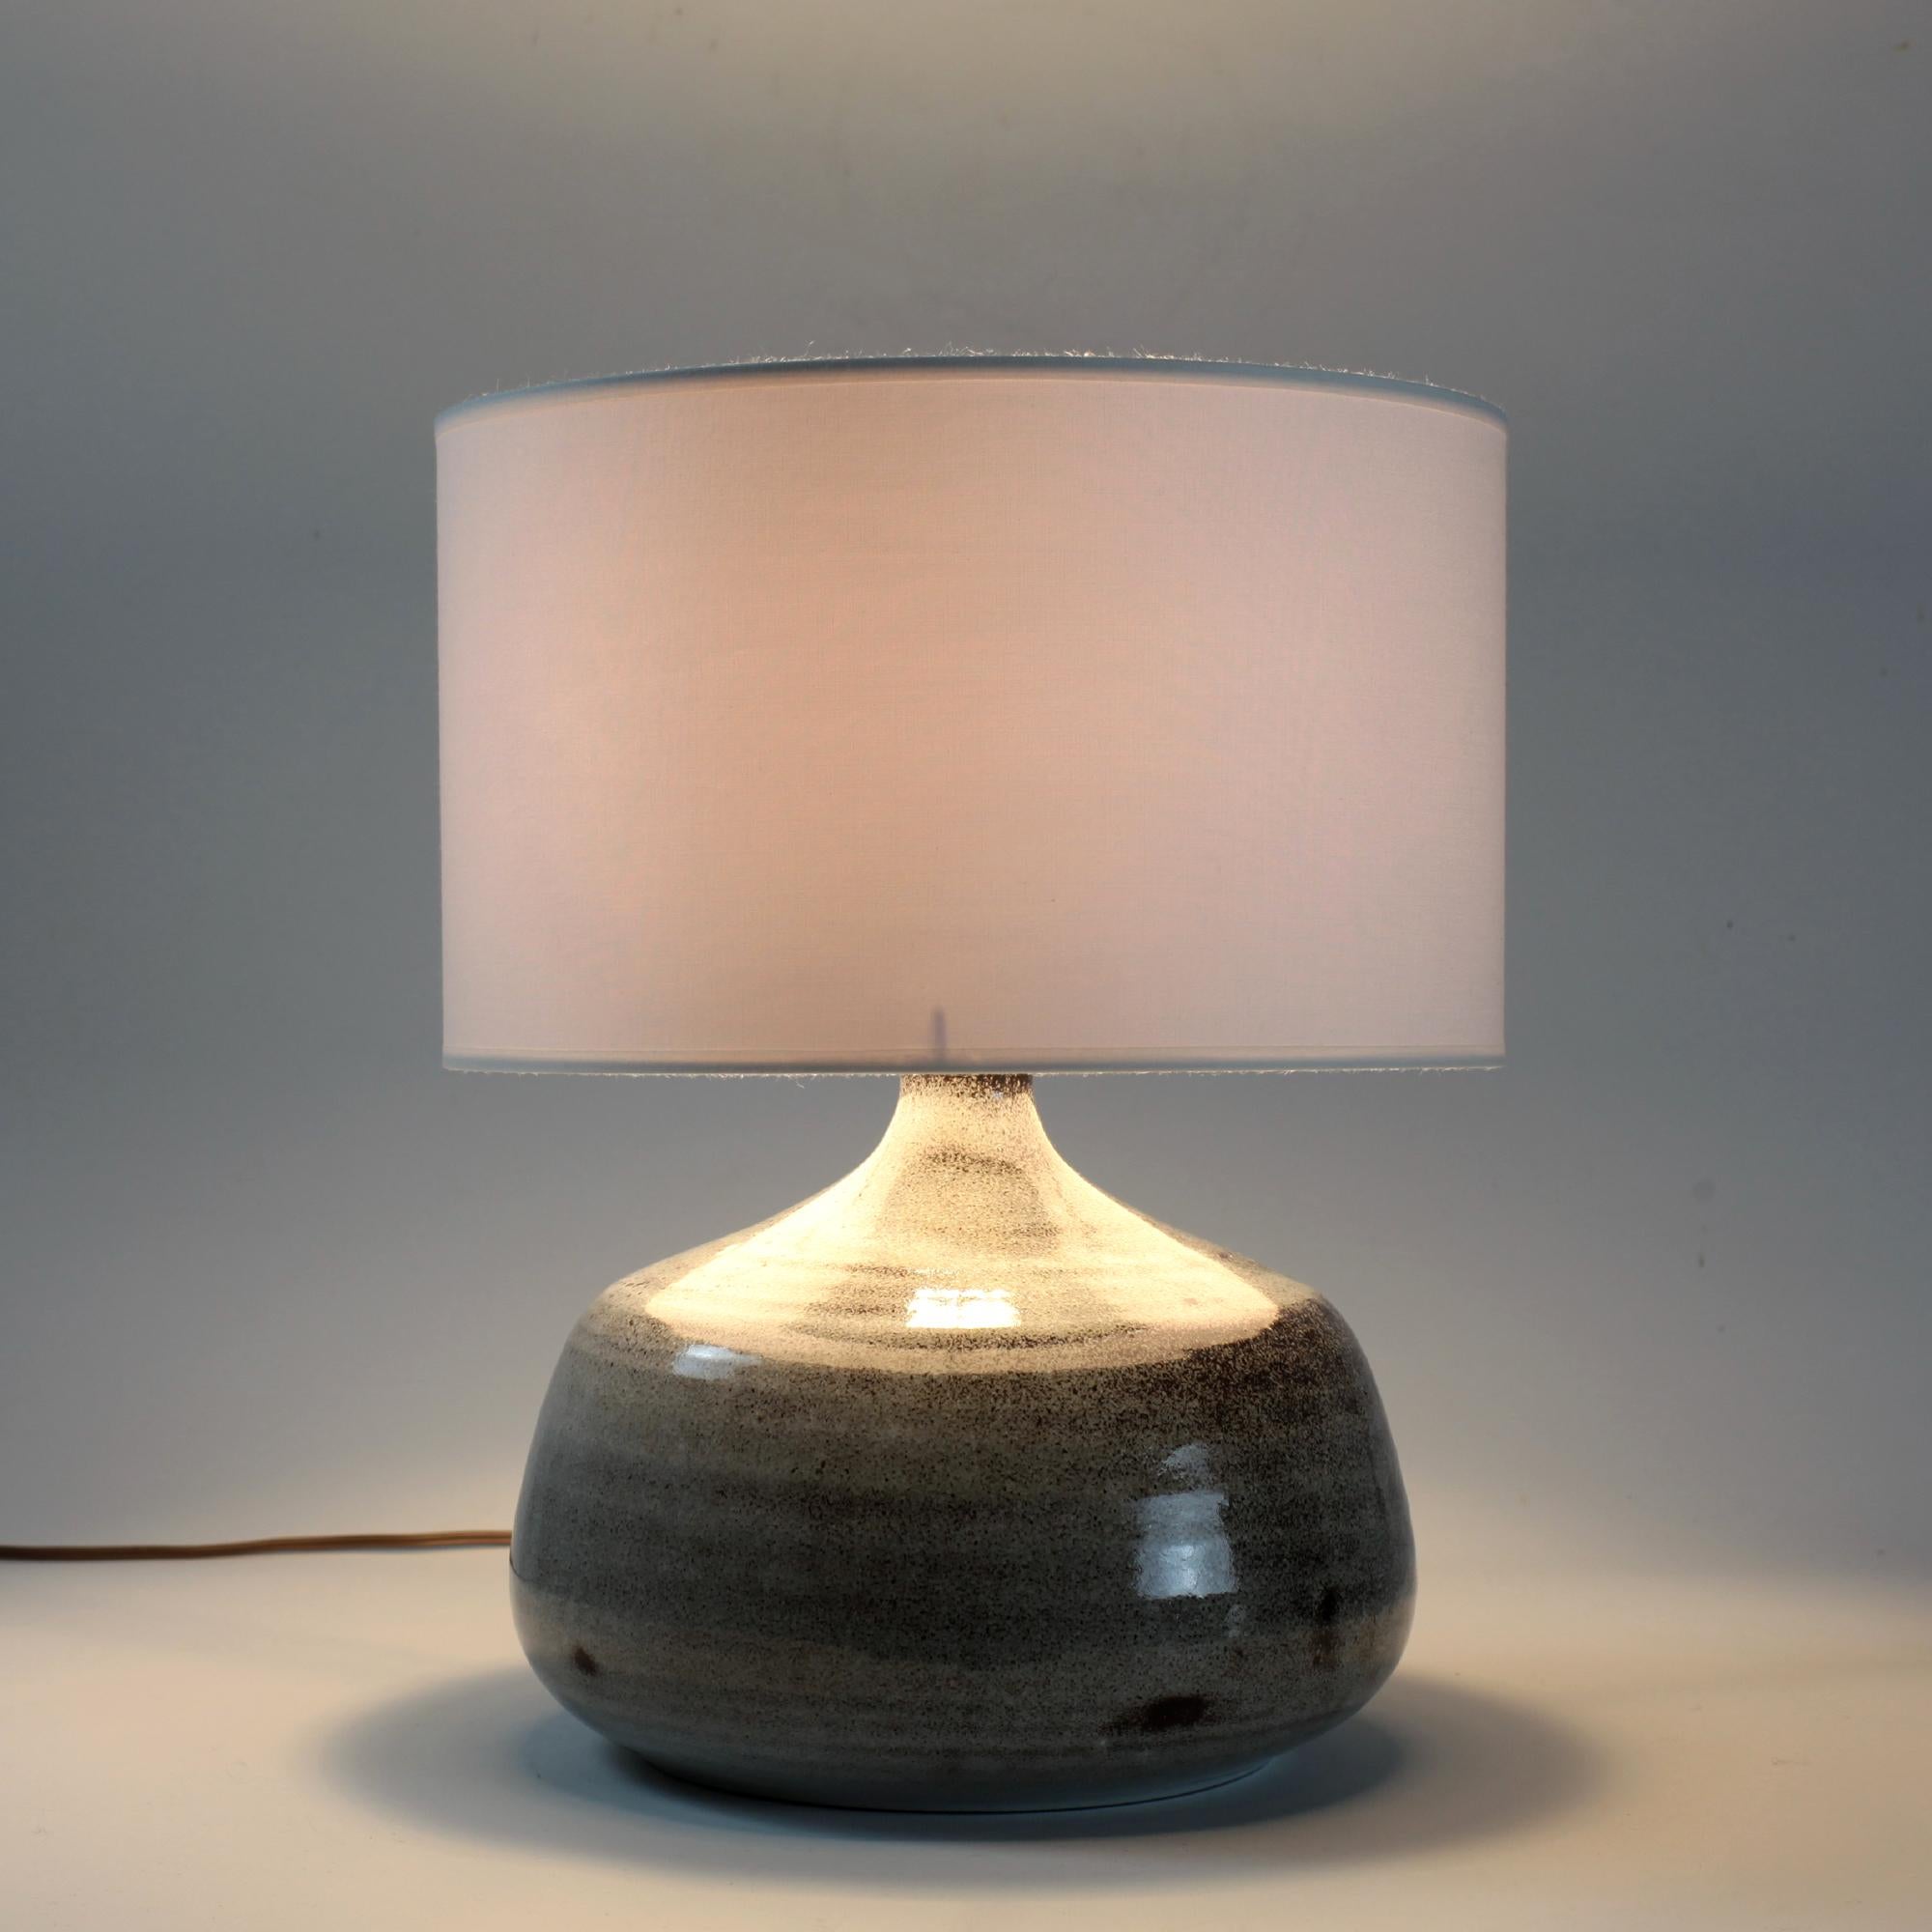 Beautiful speckled grey glazed ceramic table lamp by Poterie du Var, France, 1960s. Very nice shape.
B22 bulb
Signed under base
Lampshade not included